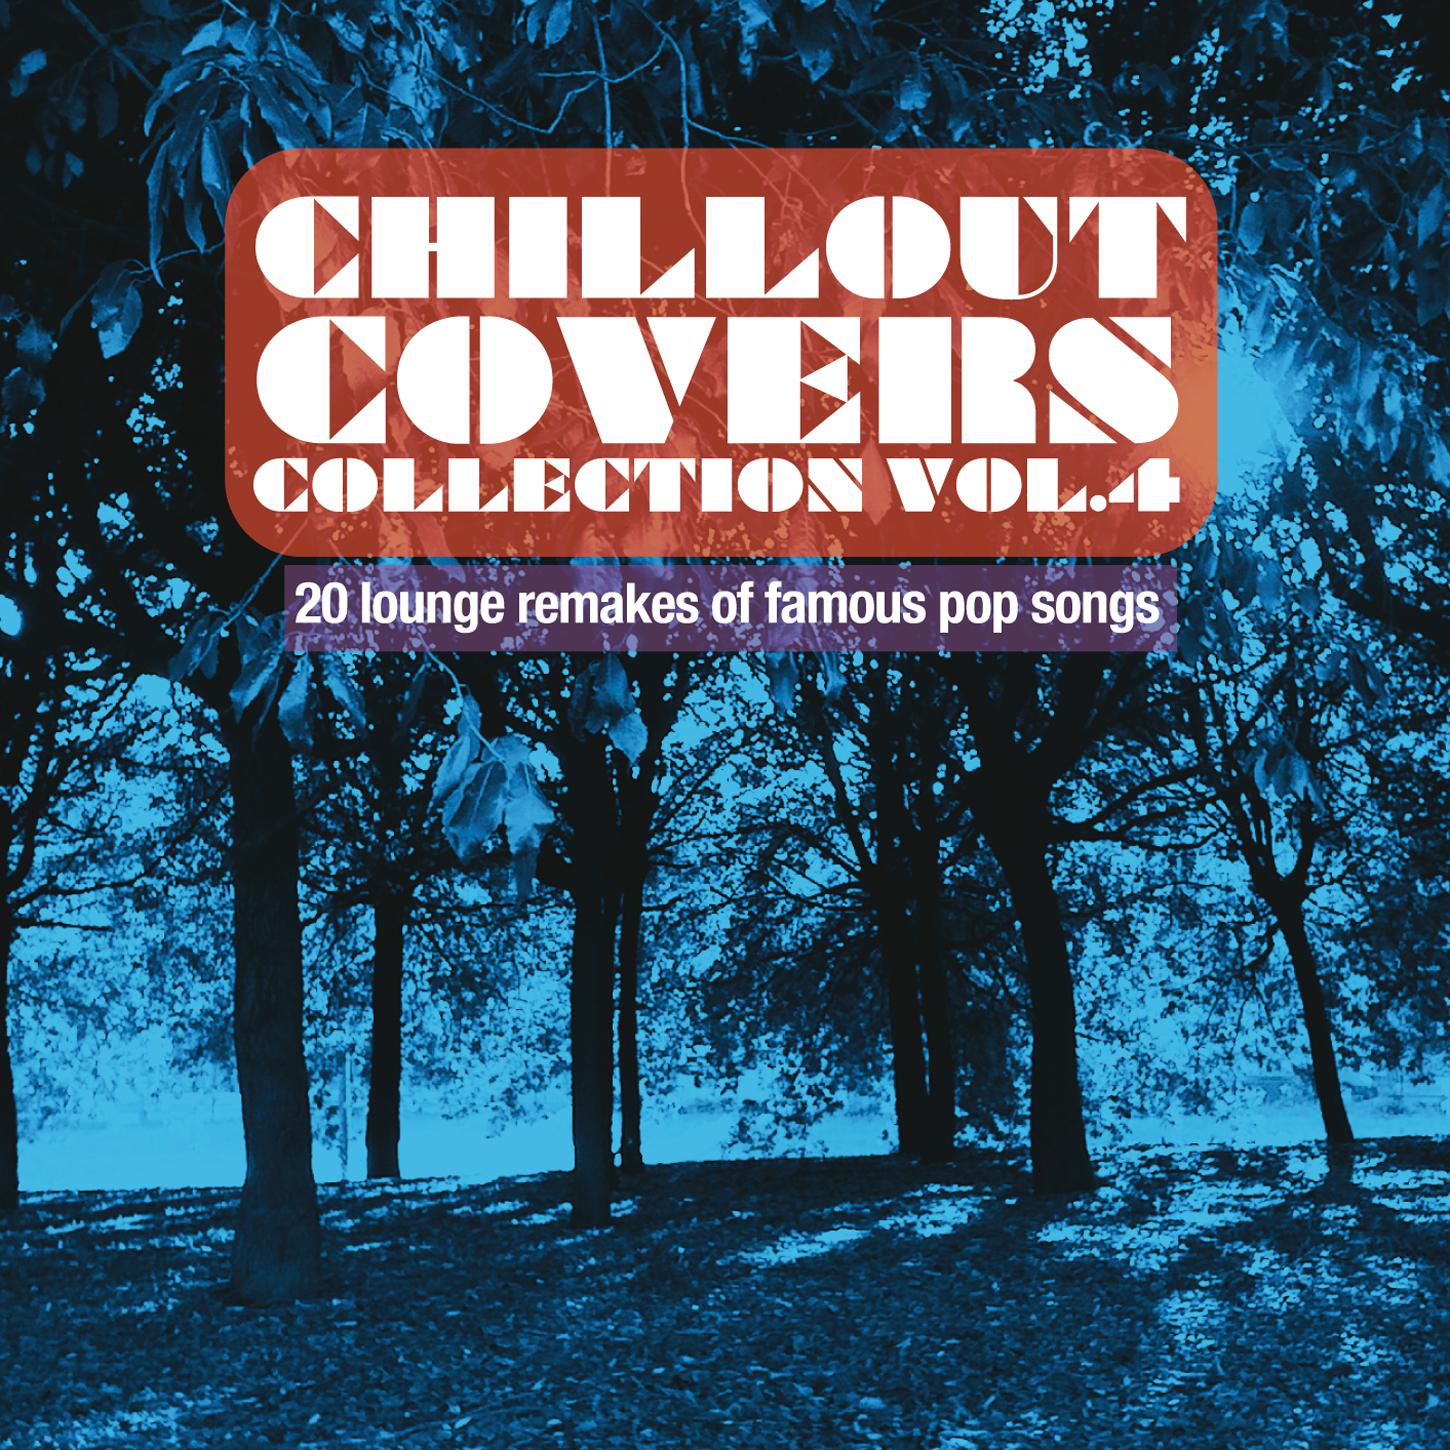 Chillout Covers Collection, Vol. 4 (20 Lounge Remakes of Famous Pop Songs)